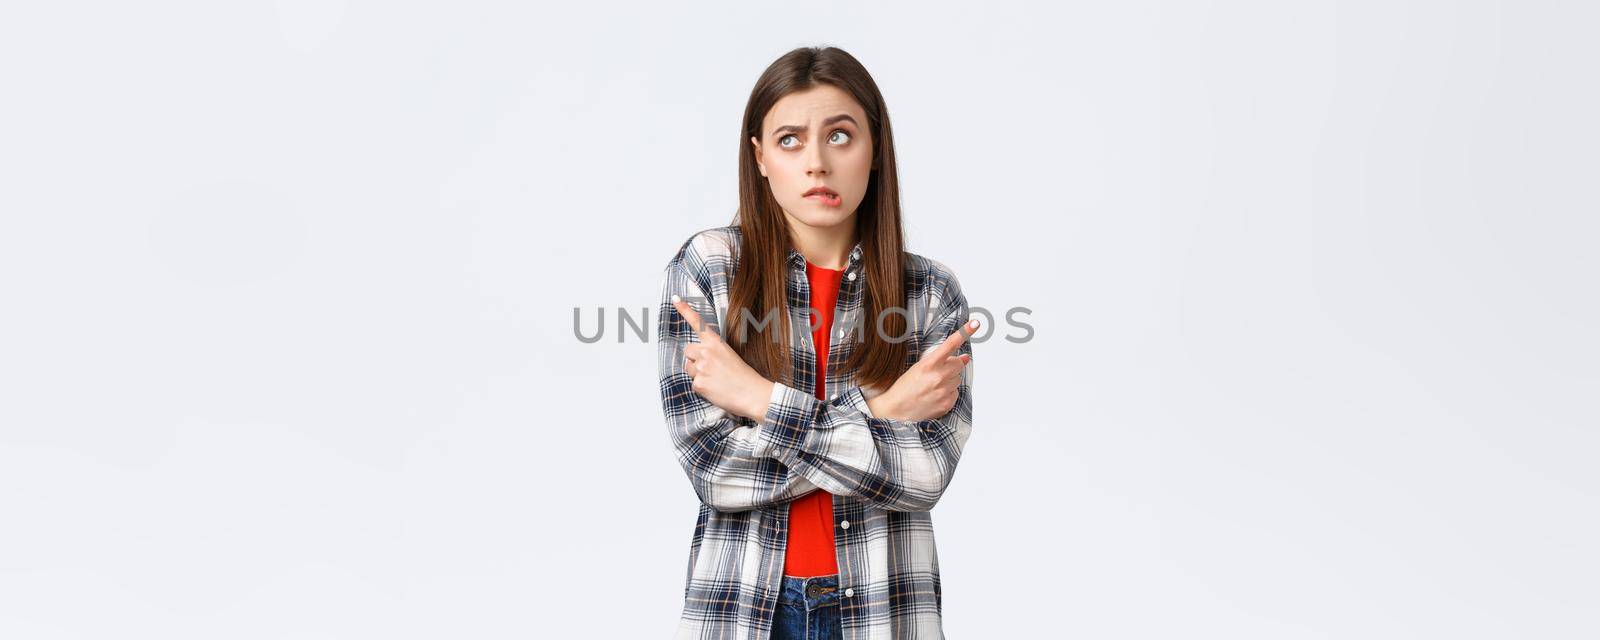 Lifestyle, different emotions, leisure activities concept. Indecisive silly cute girl facing hard choice, cross hands and pointing sideways, leaning to left variant, biting lip confused and puzzled.